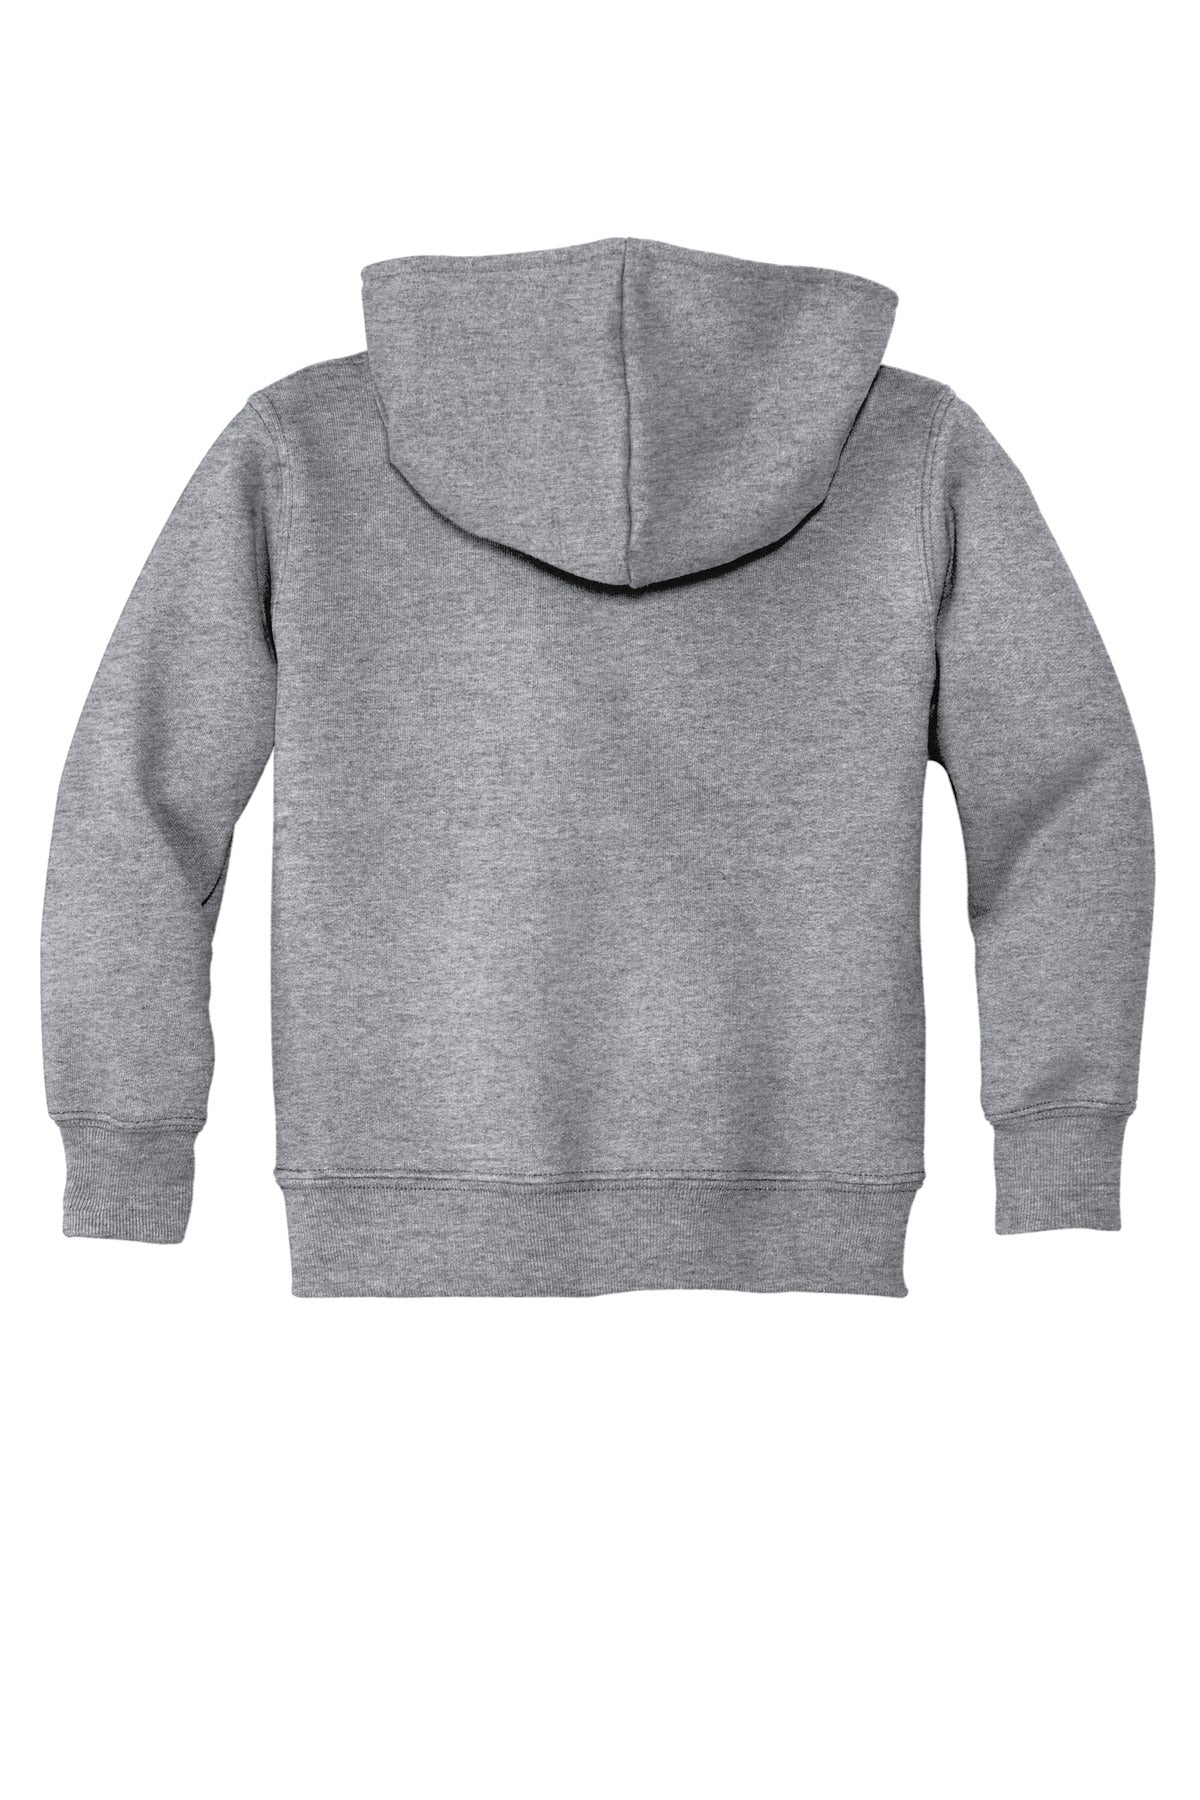 Port & Company Toddler Core Fleece Pullover Hooded Sweatshirt. CAR78TH - Athletic Heather